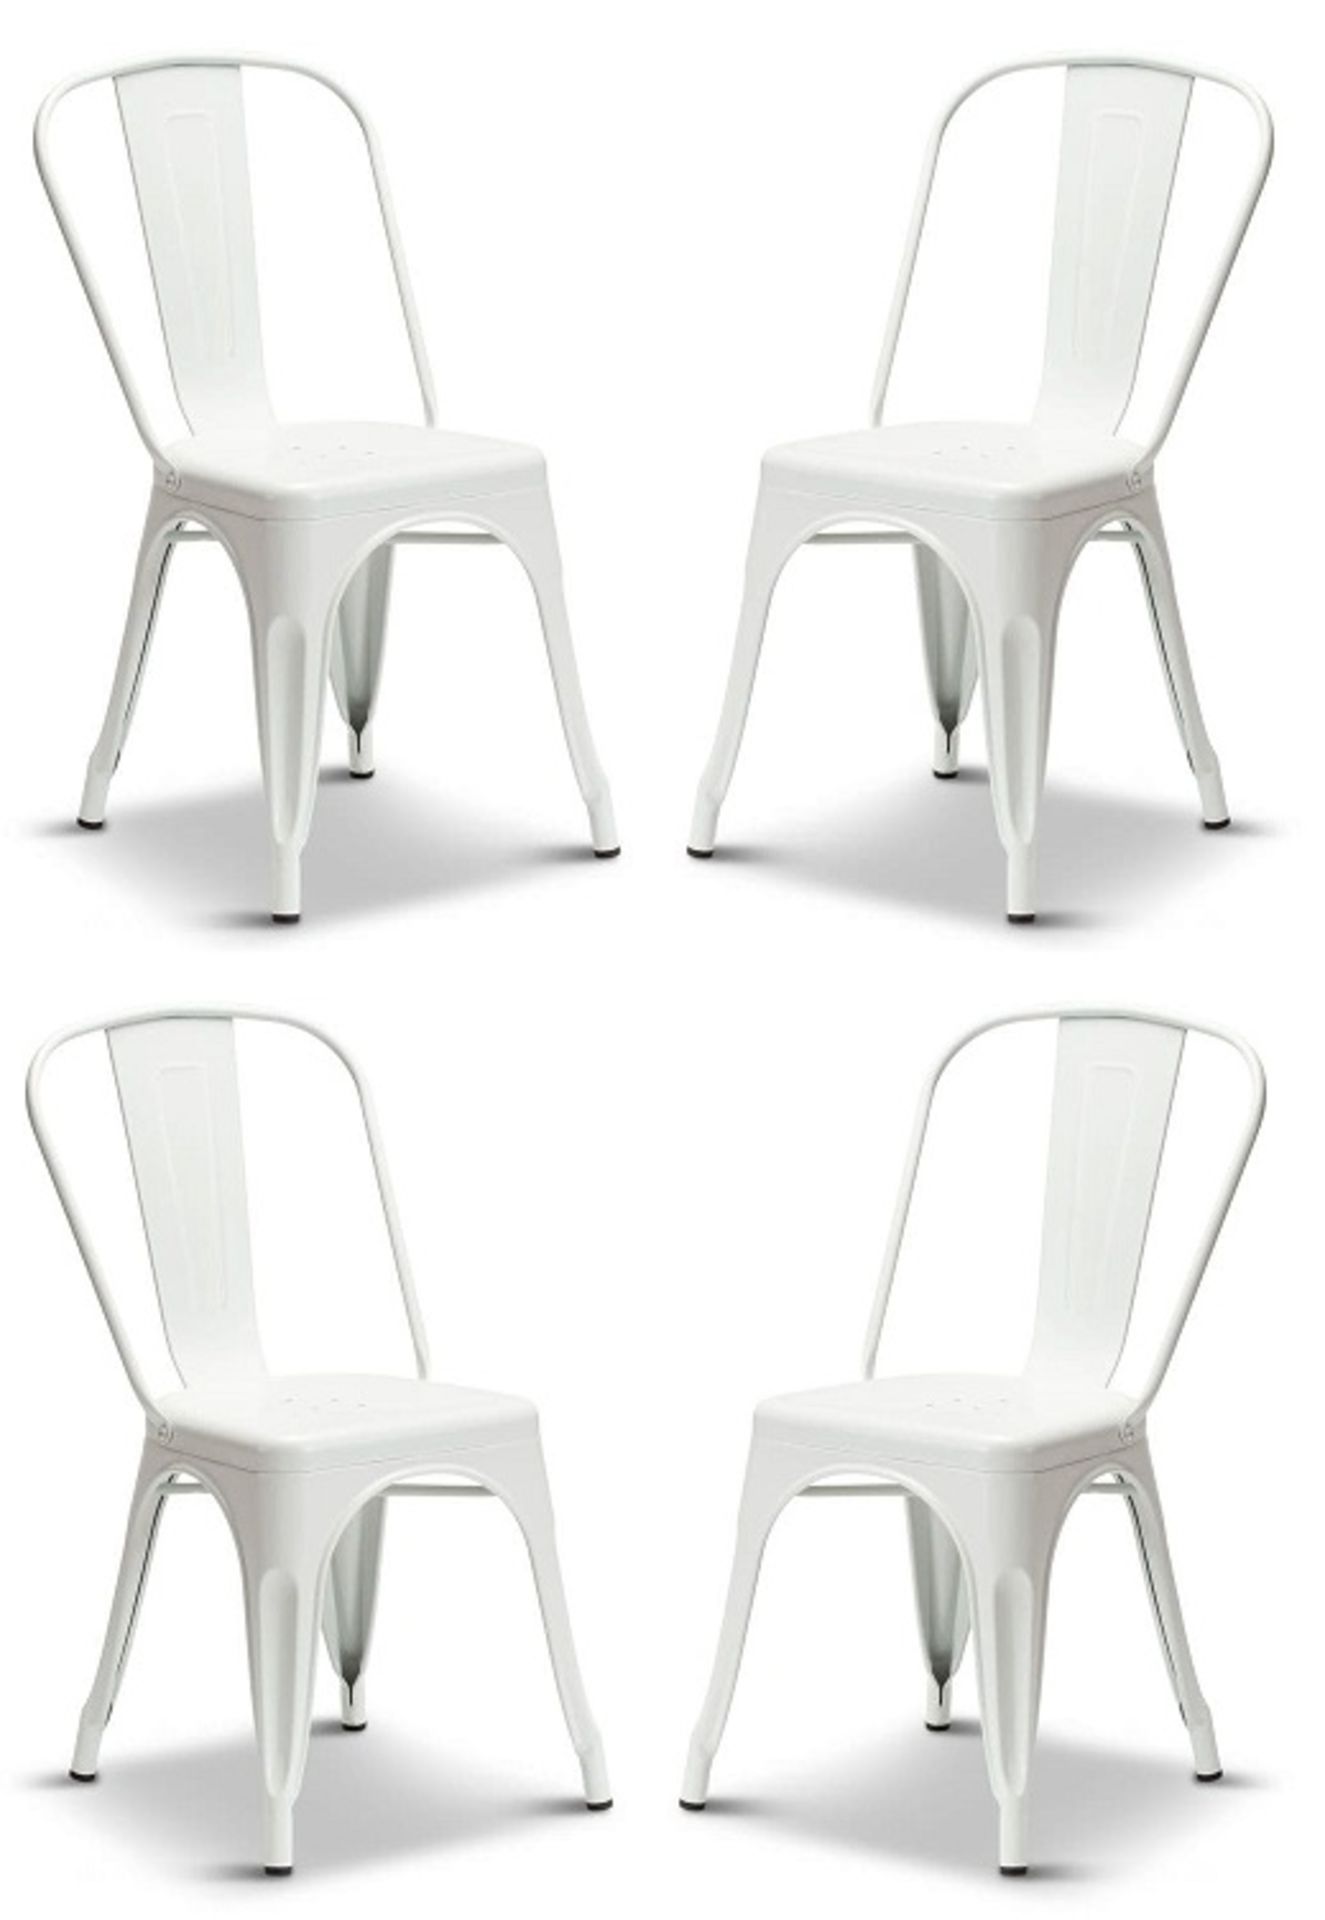 1 x Tolix Industrial Style Outdoor Bistro Table and Chair Set in White- Includes 1 x Table and 4 x - Image 4 of 13